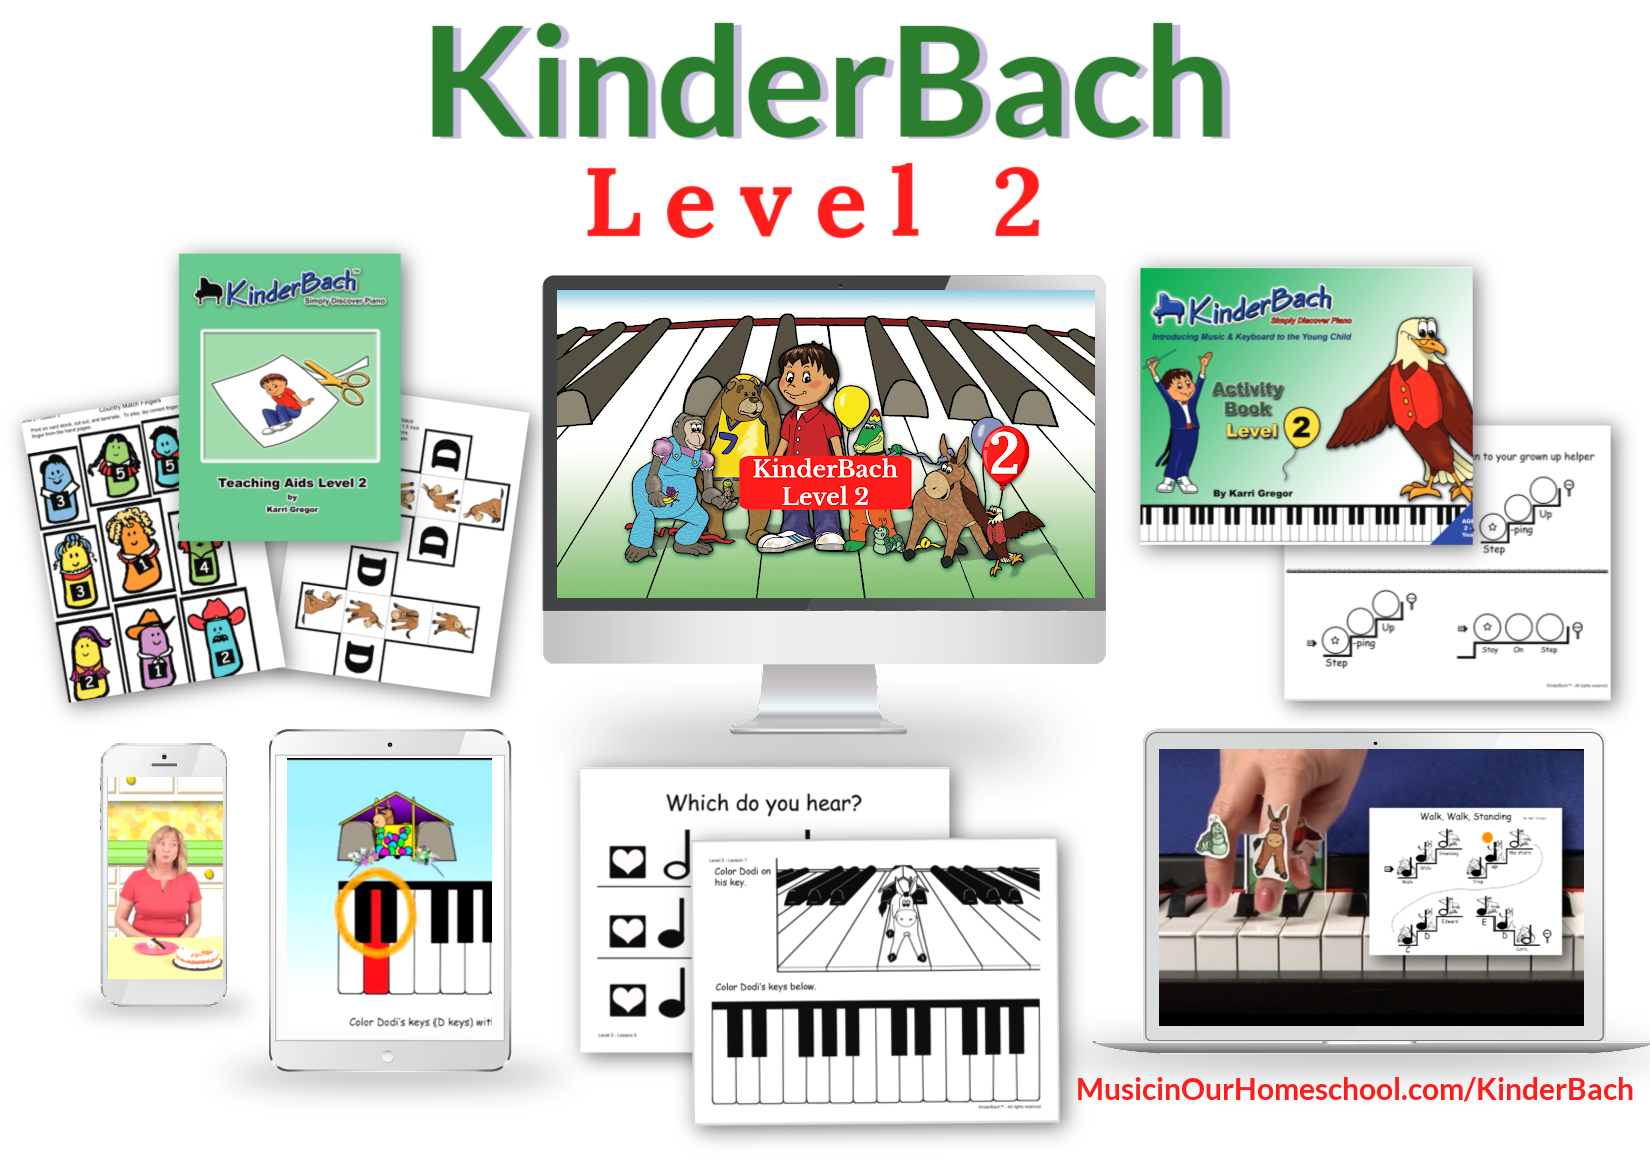 KinderBach Level 2 beginning piano and music theory for preschoolers